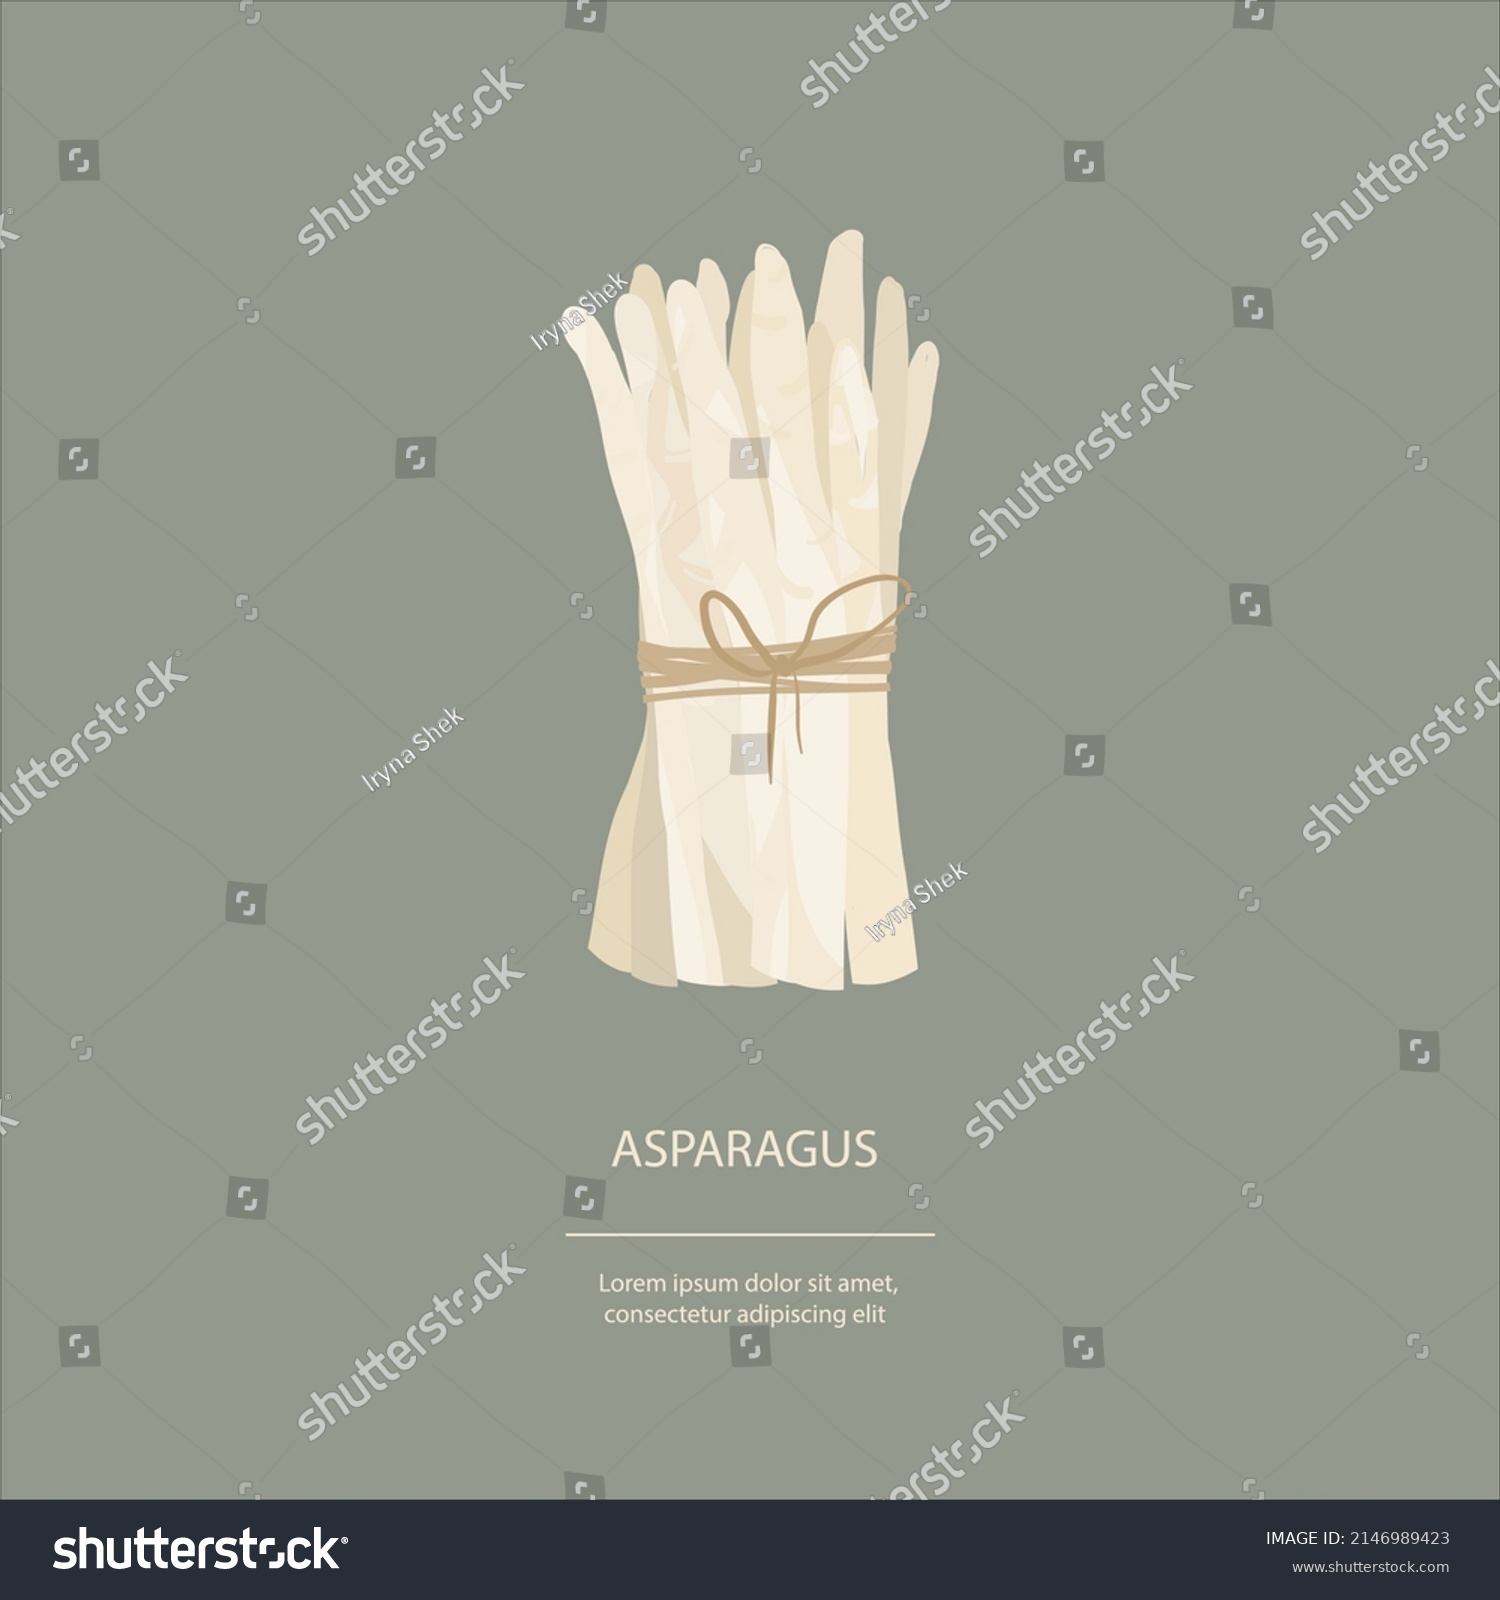 Hand drawn illustration in cartoon flat style of white Asparagus. Fresh vegetarian  asparagus in bunch, tied with string. Healthy food plants logo.  #2146989423